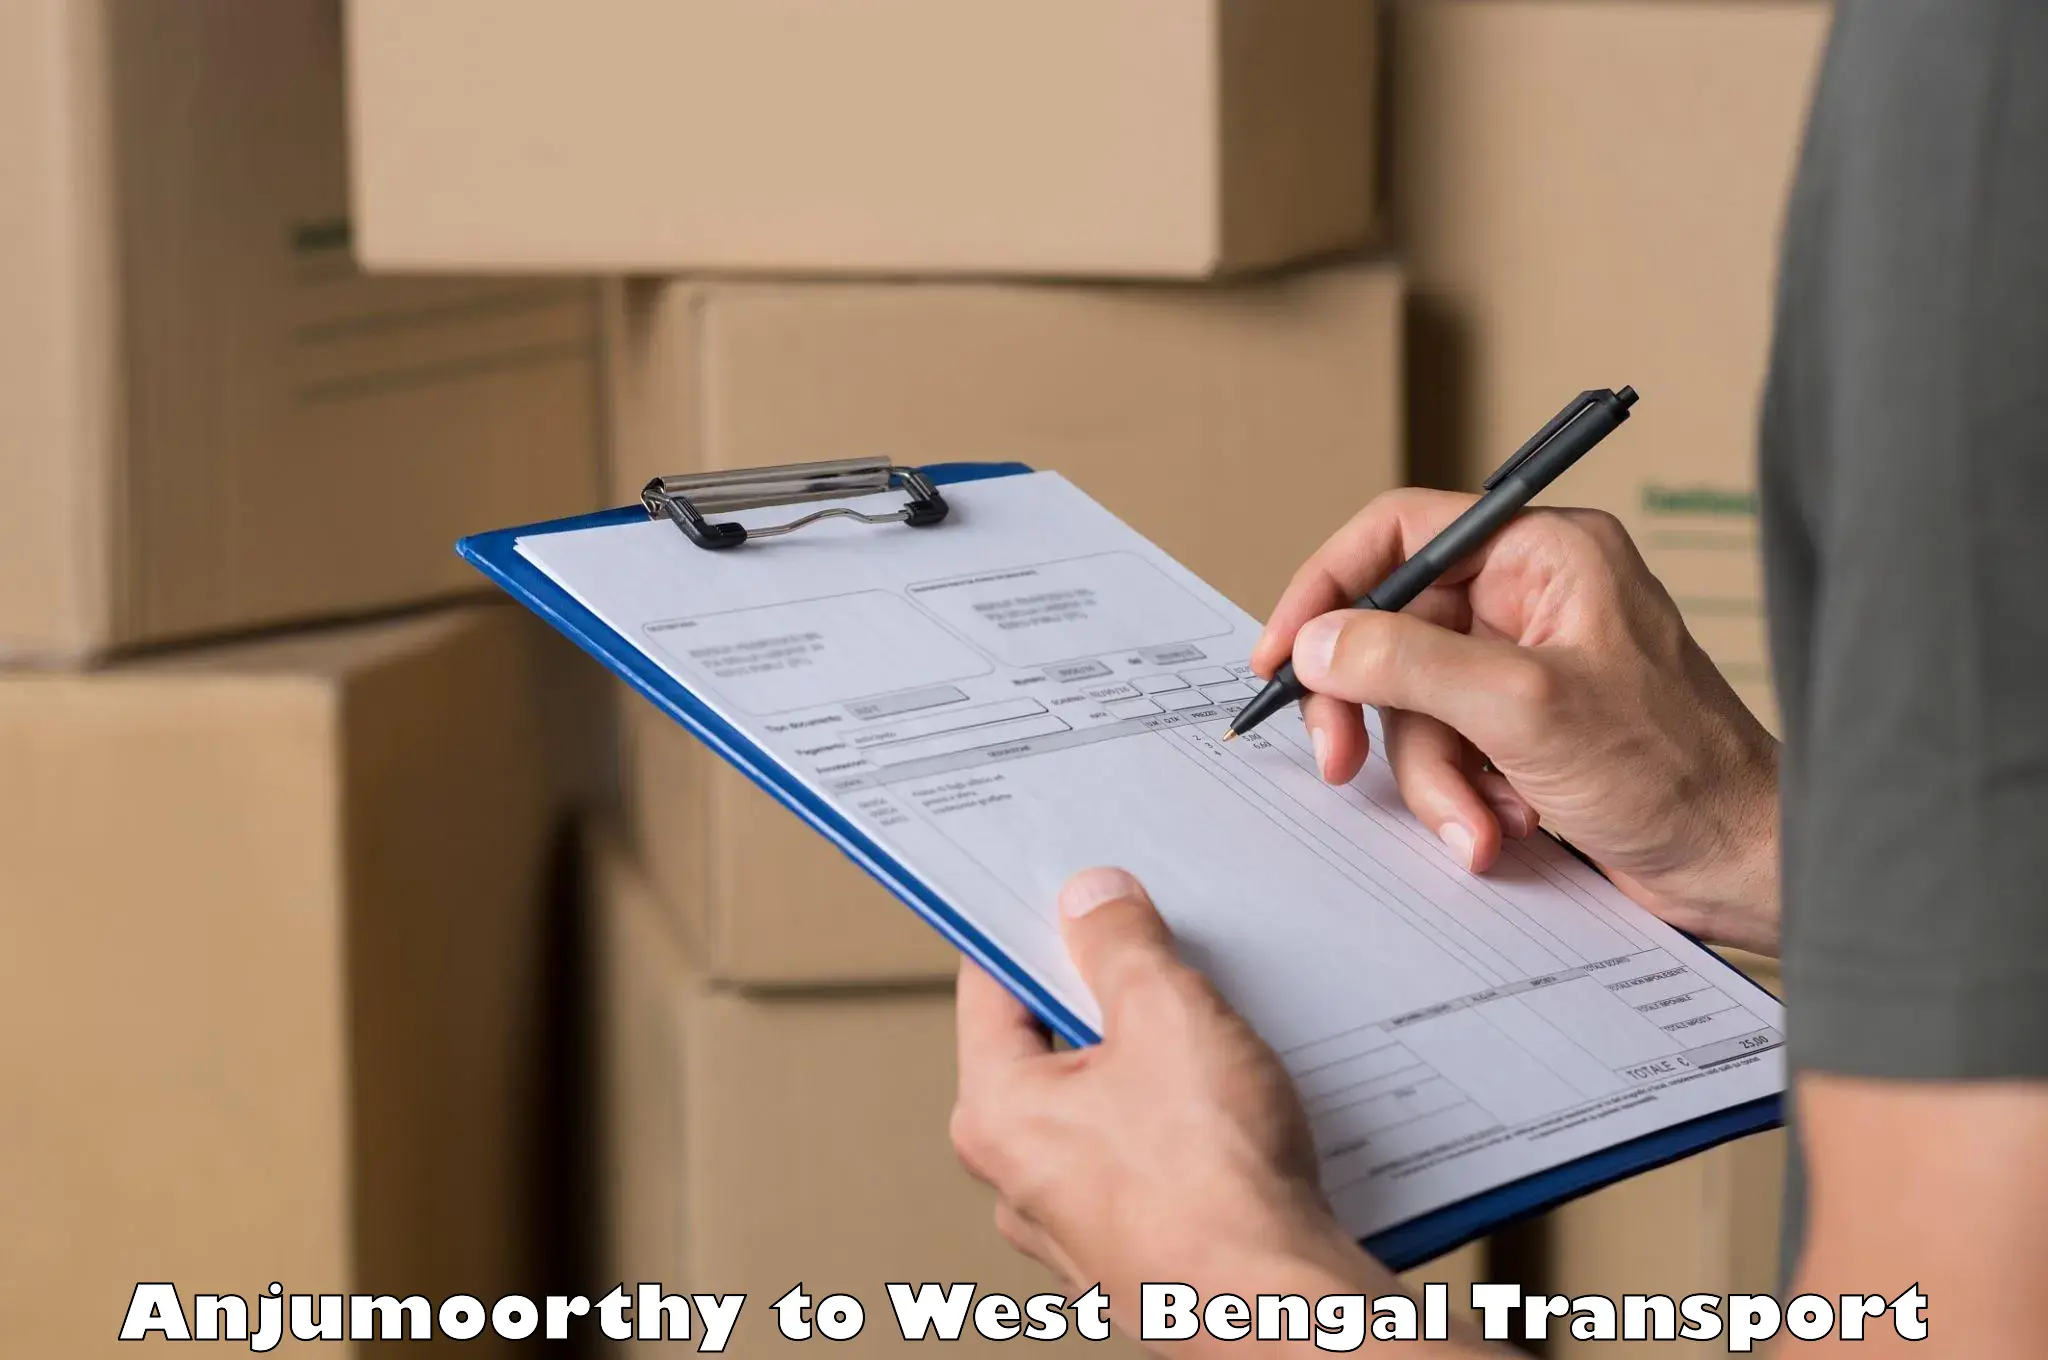 Air cargo transport services Anjumoorthy to West Bengal